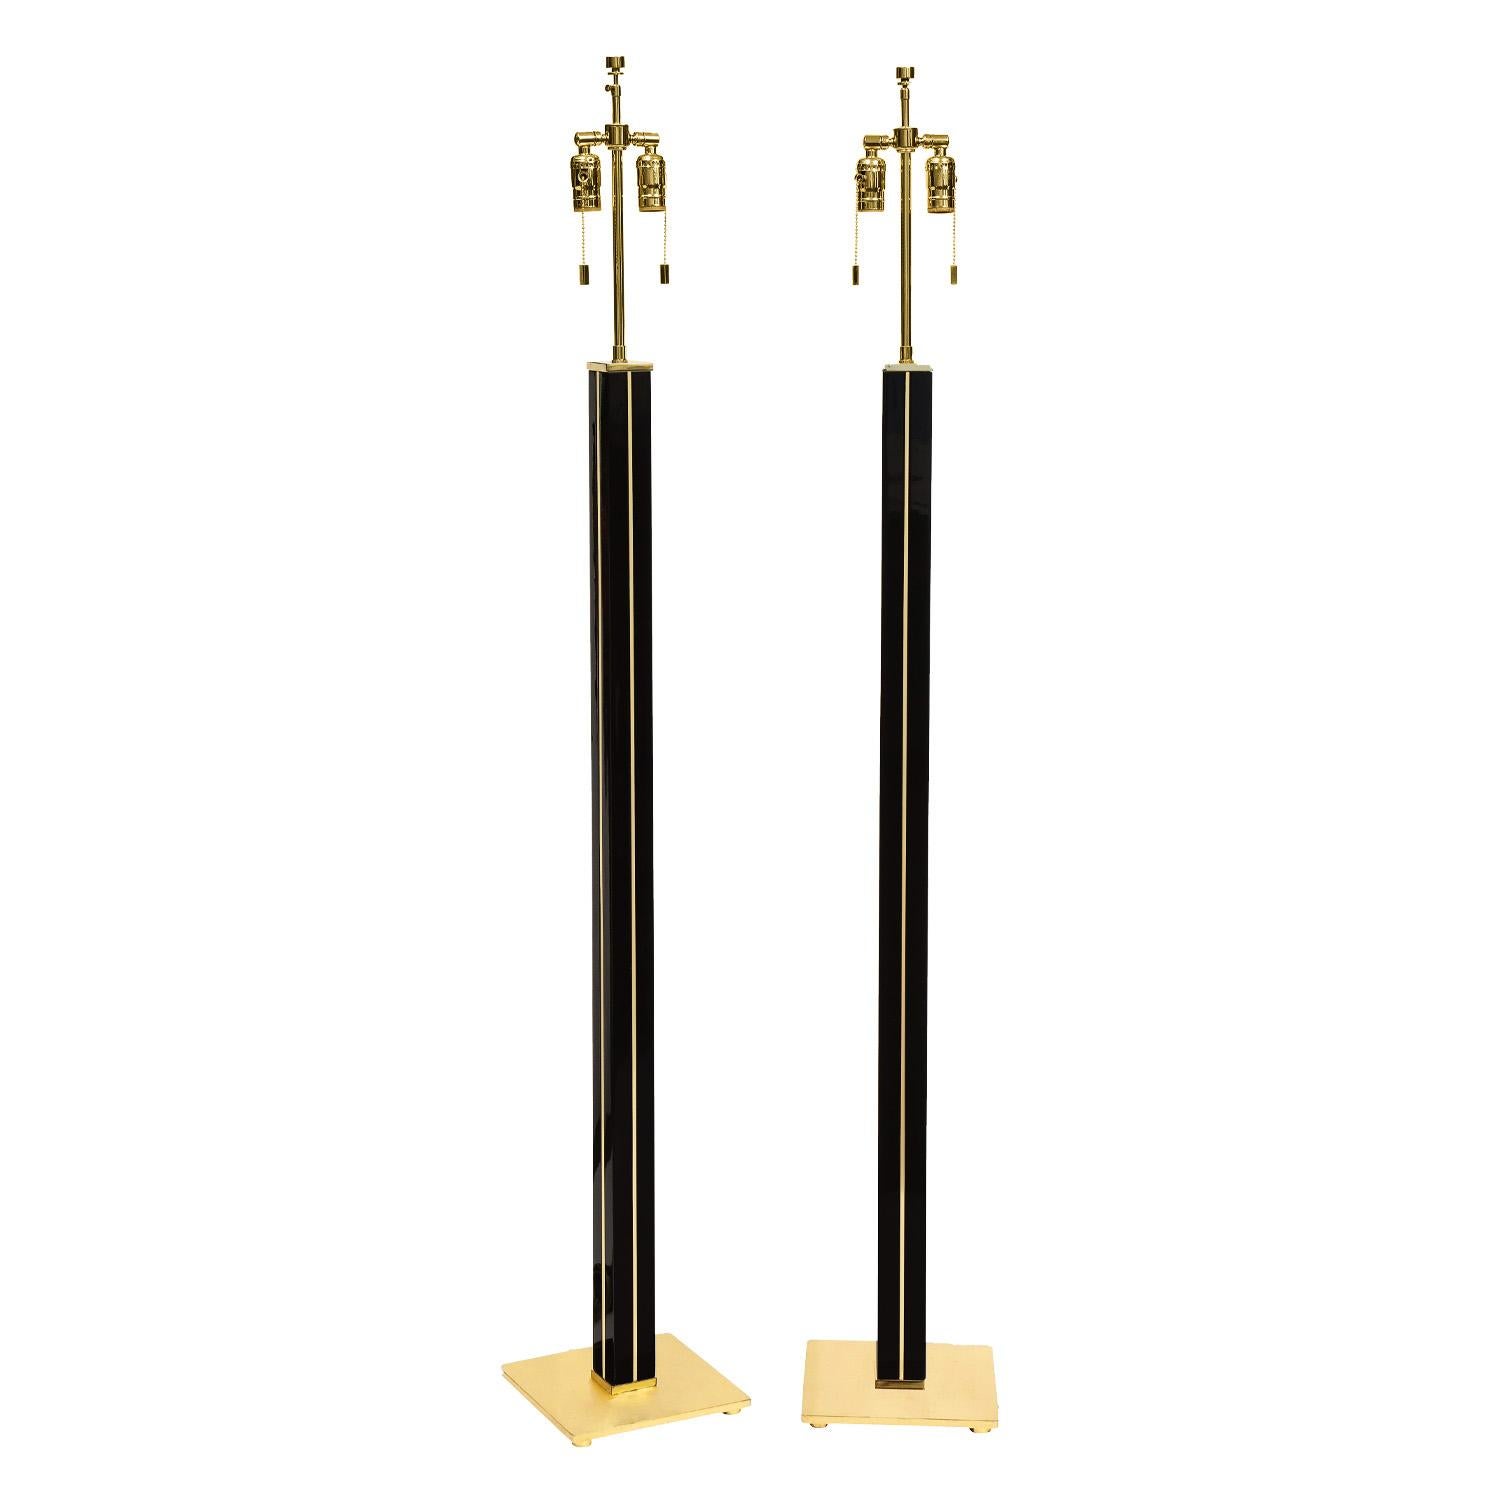 Modern Karl Springer Exquisite Pair of Floor Lamps in Black Lacquer and Brass 1980s For Sale